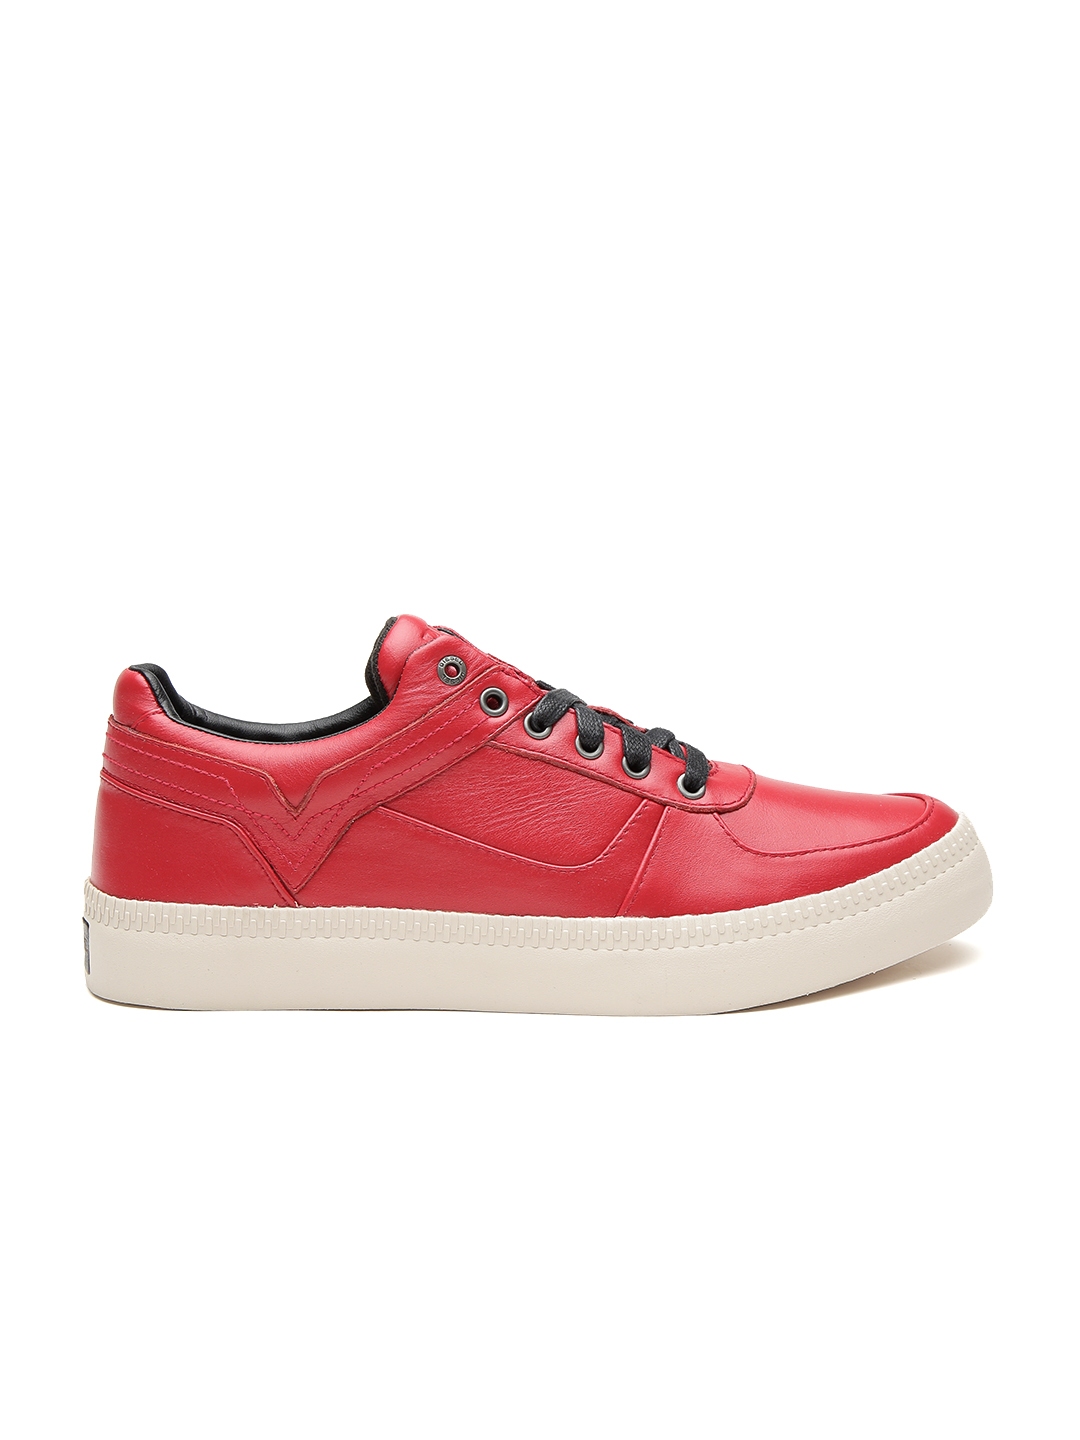 Buy DIESEL Men Red Solid Leather Regular Sneakers - Casual Shoes for ...